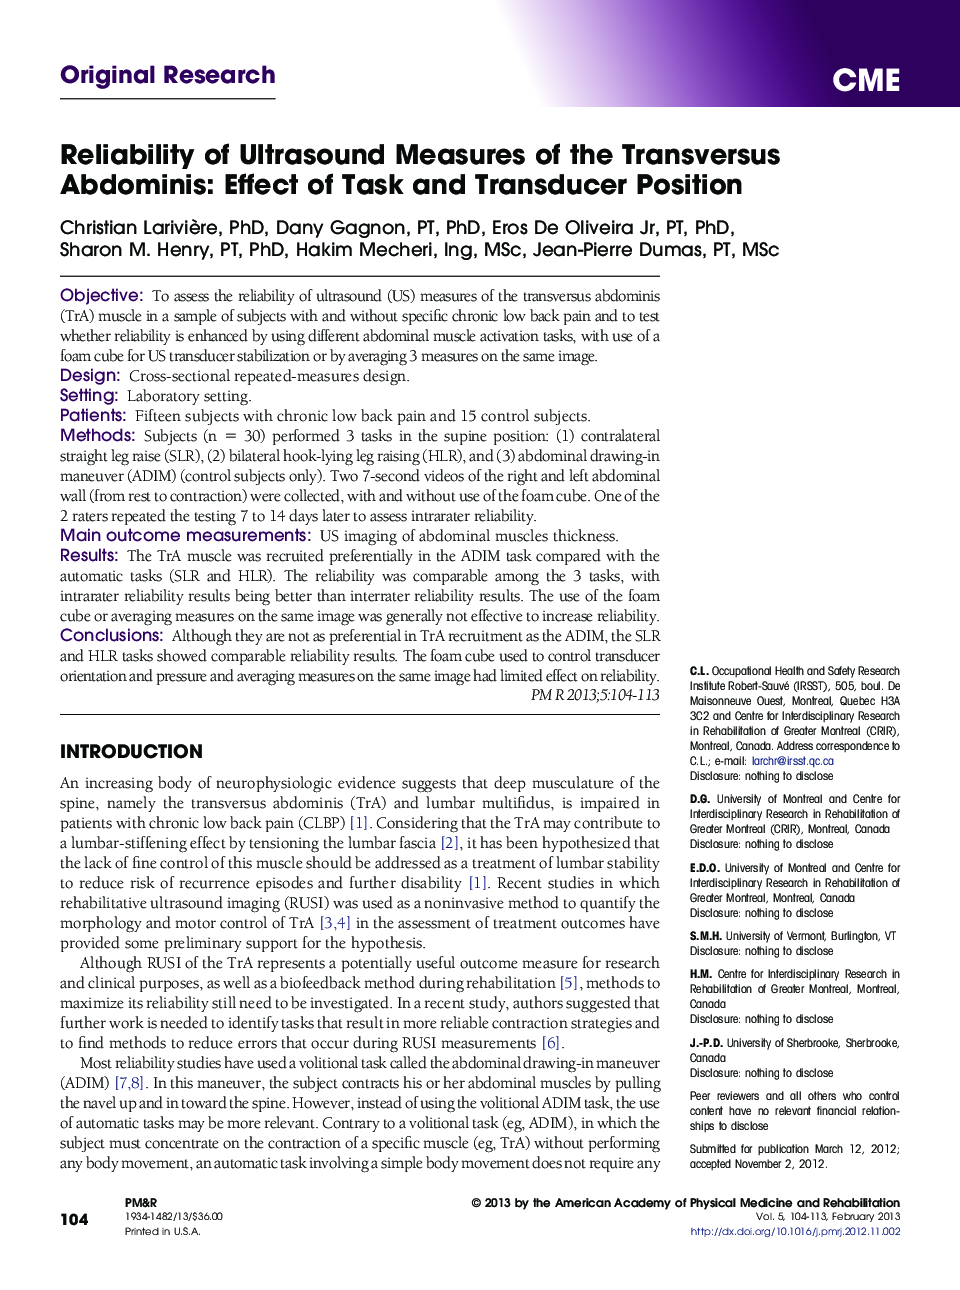 Reliability of Ultrasound Measures of the Transversus Abdominis: Effect of Task and Transducer Position 